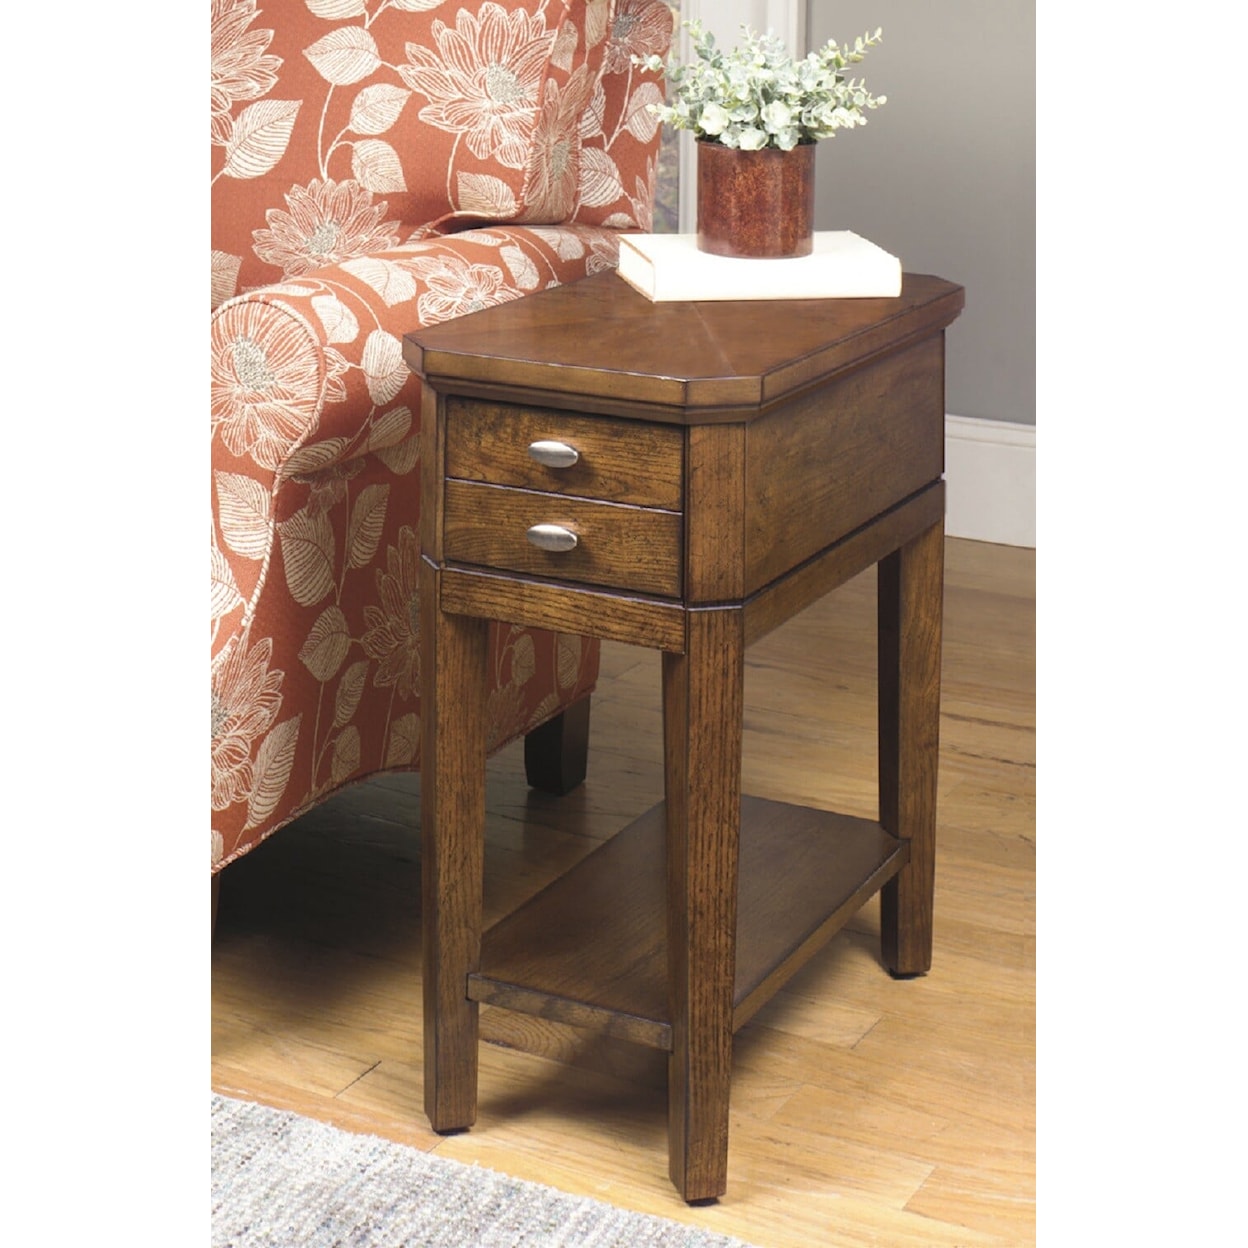 Null Furniture 2016 - Newport End Table